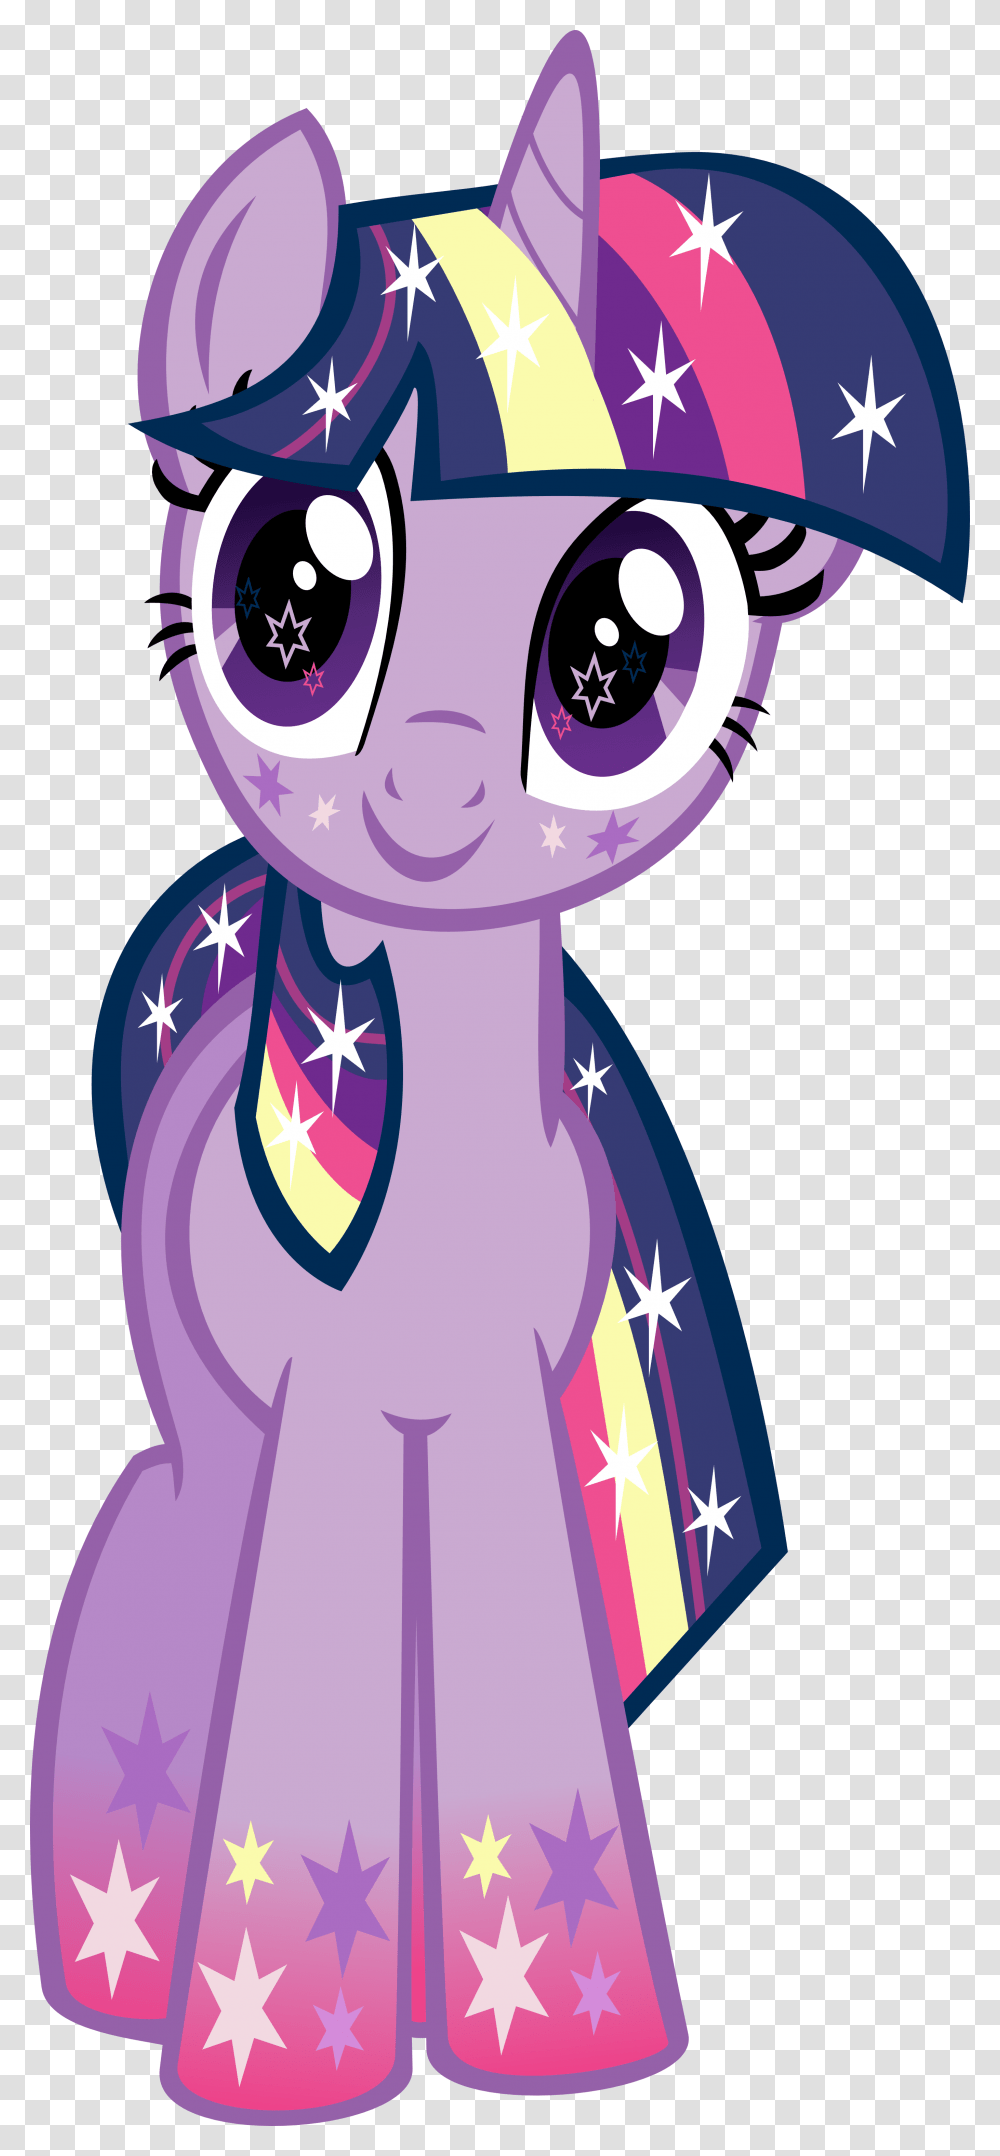 Rainbowfied Twilight Sparkle Hug By Meganlovesangrybirds Rainbowfied Twilight Sparkle, Purple, Animal Transparent Png